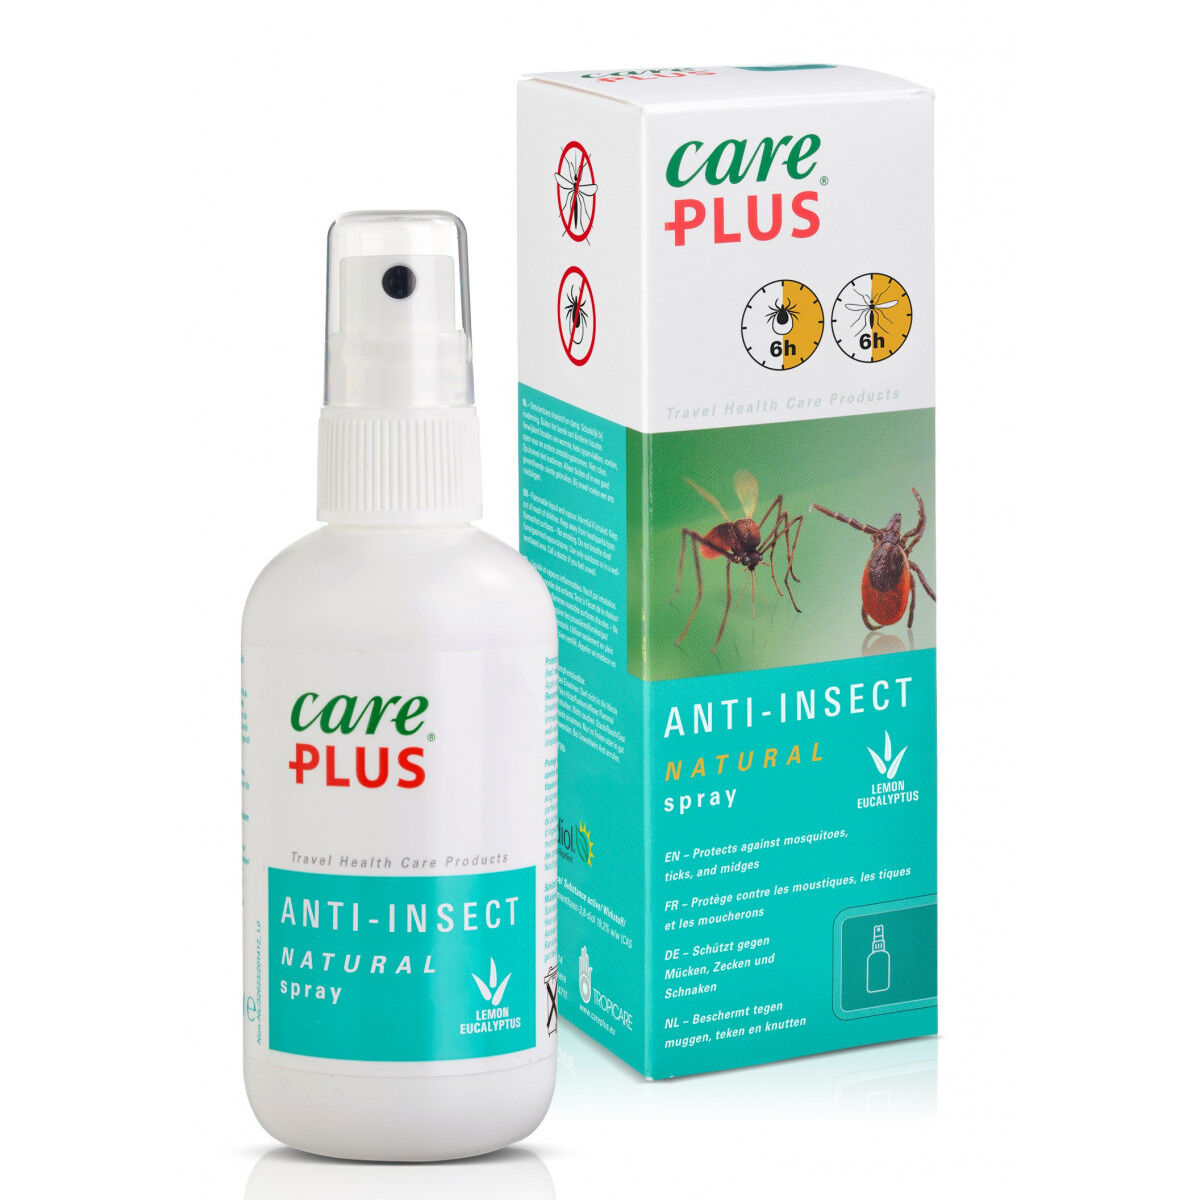 Care Plus Anti-Insect - Natural spray Citriodiol - Insect repellent